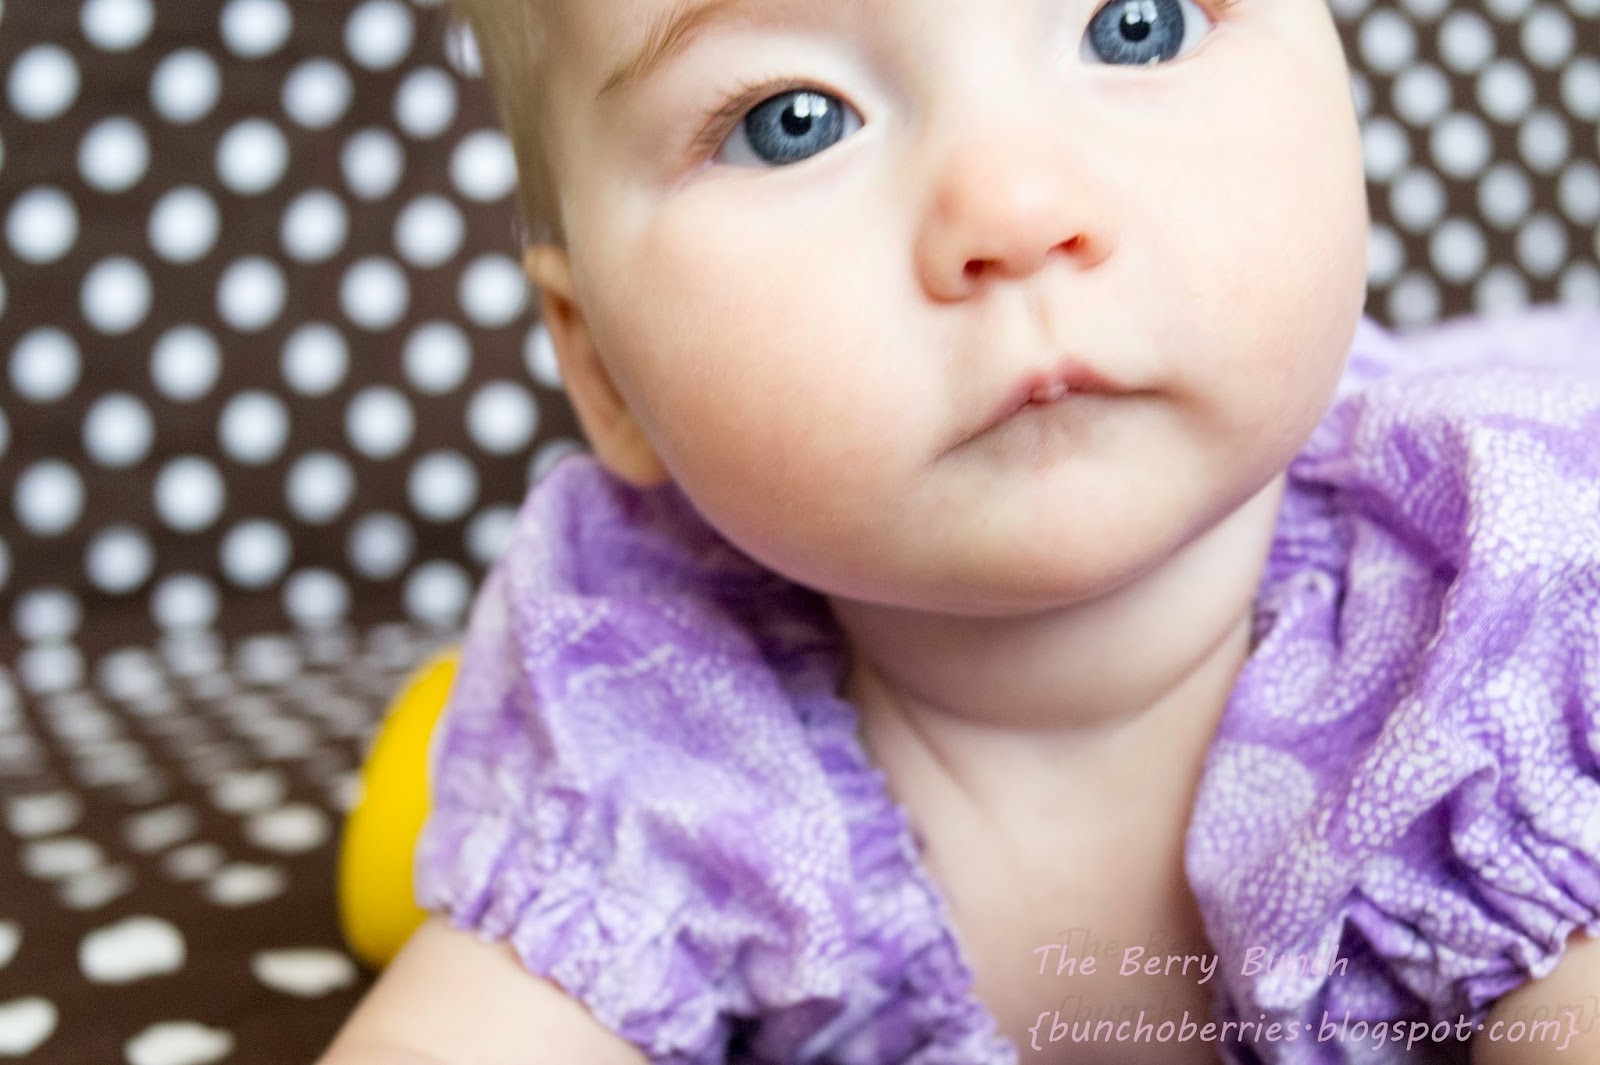 The Berry Bunch: Tie Dye Diva Patterns: Baby Peasant Top Review {TDD Patterns}